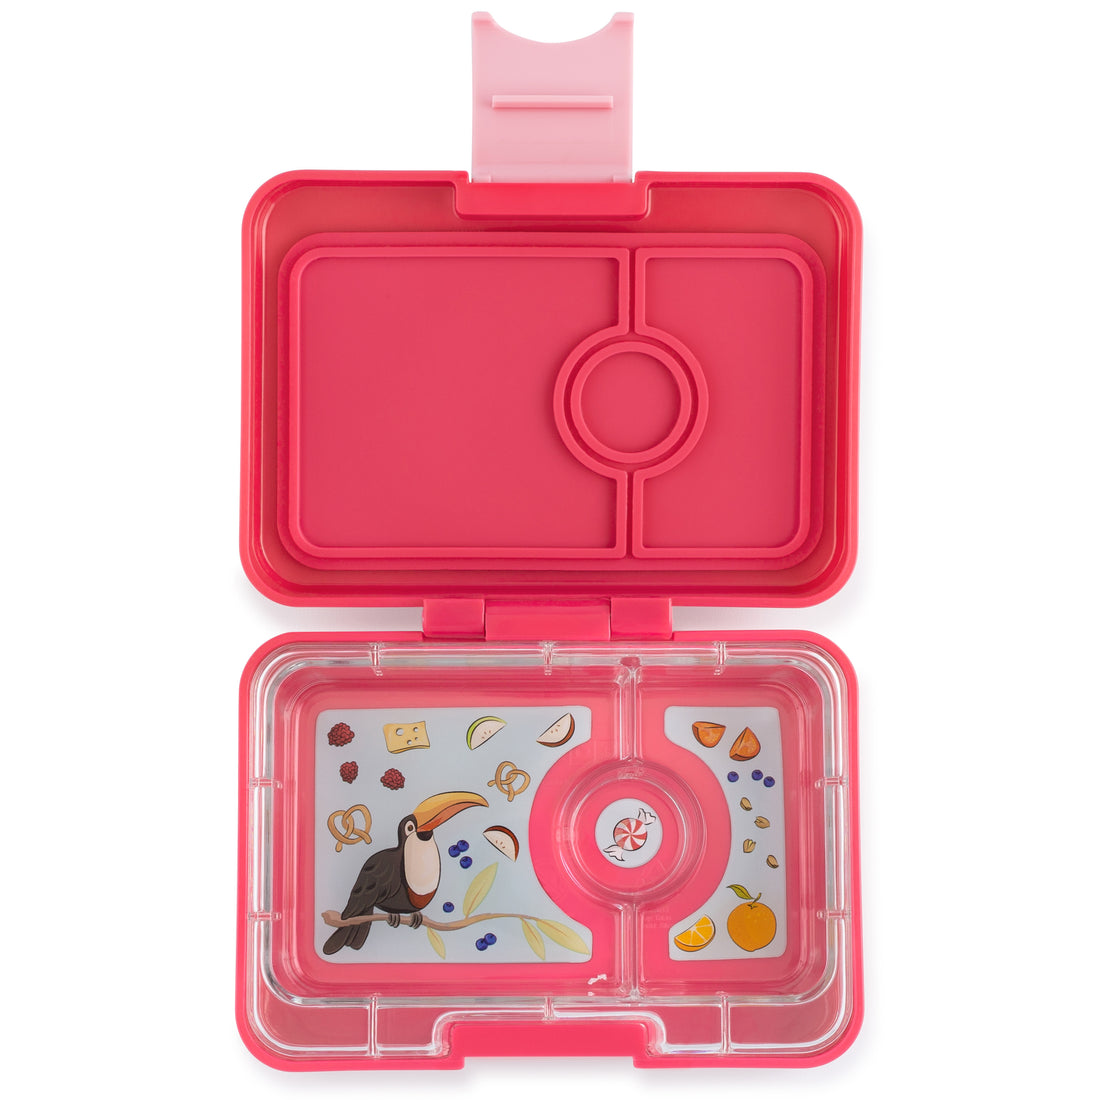 yumbox-mini-snack-lotus-pink-3-compartment-lunch-box- (2)